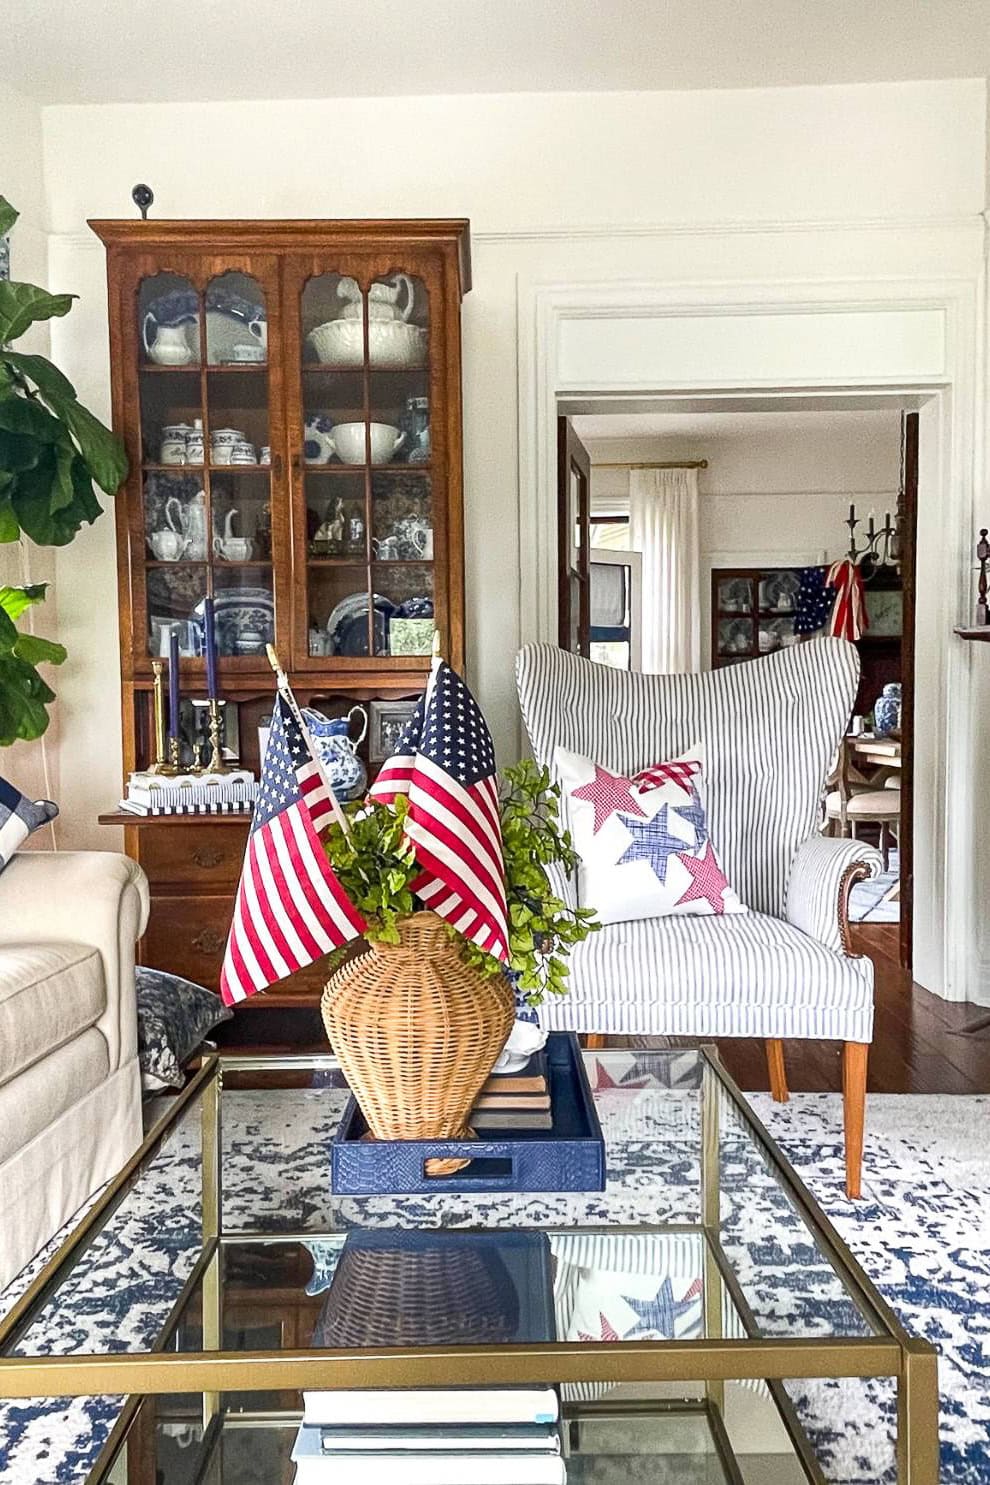 Decorating with American Flags to create a patriotic vignette on the coffee table in the living room